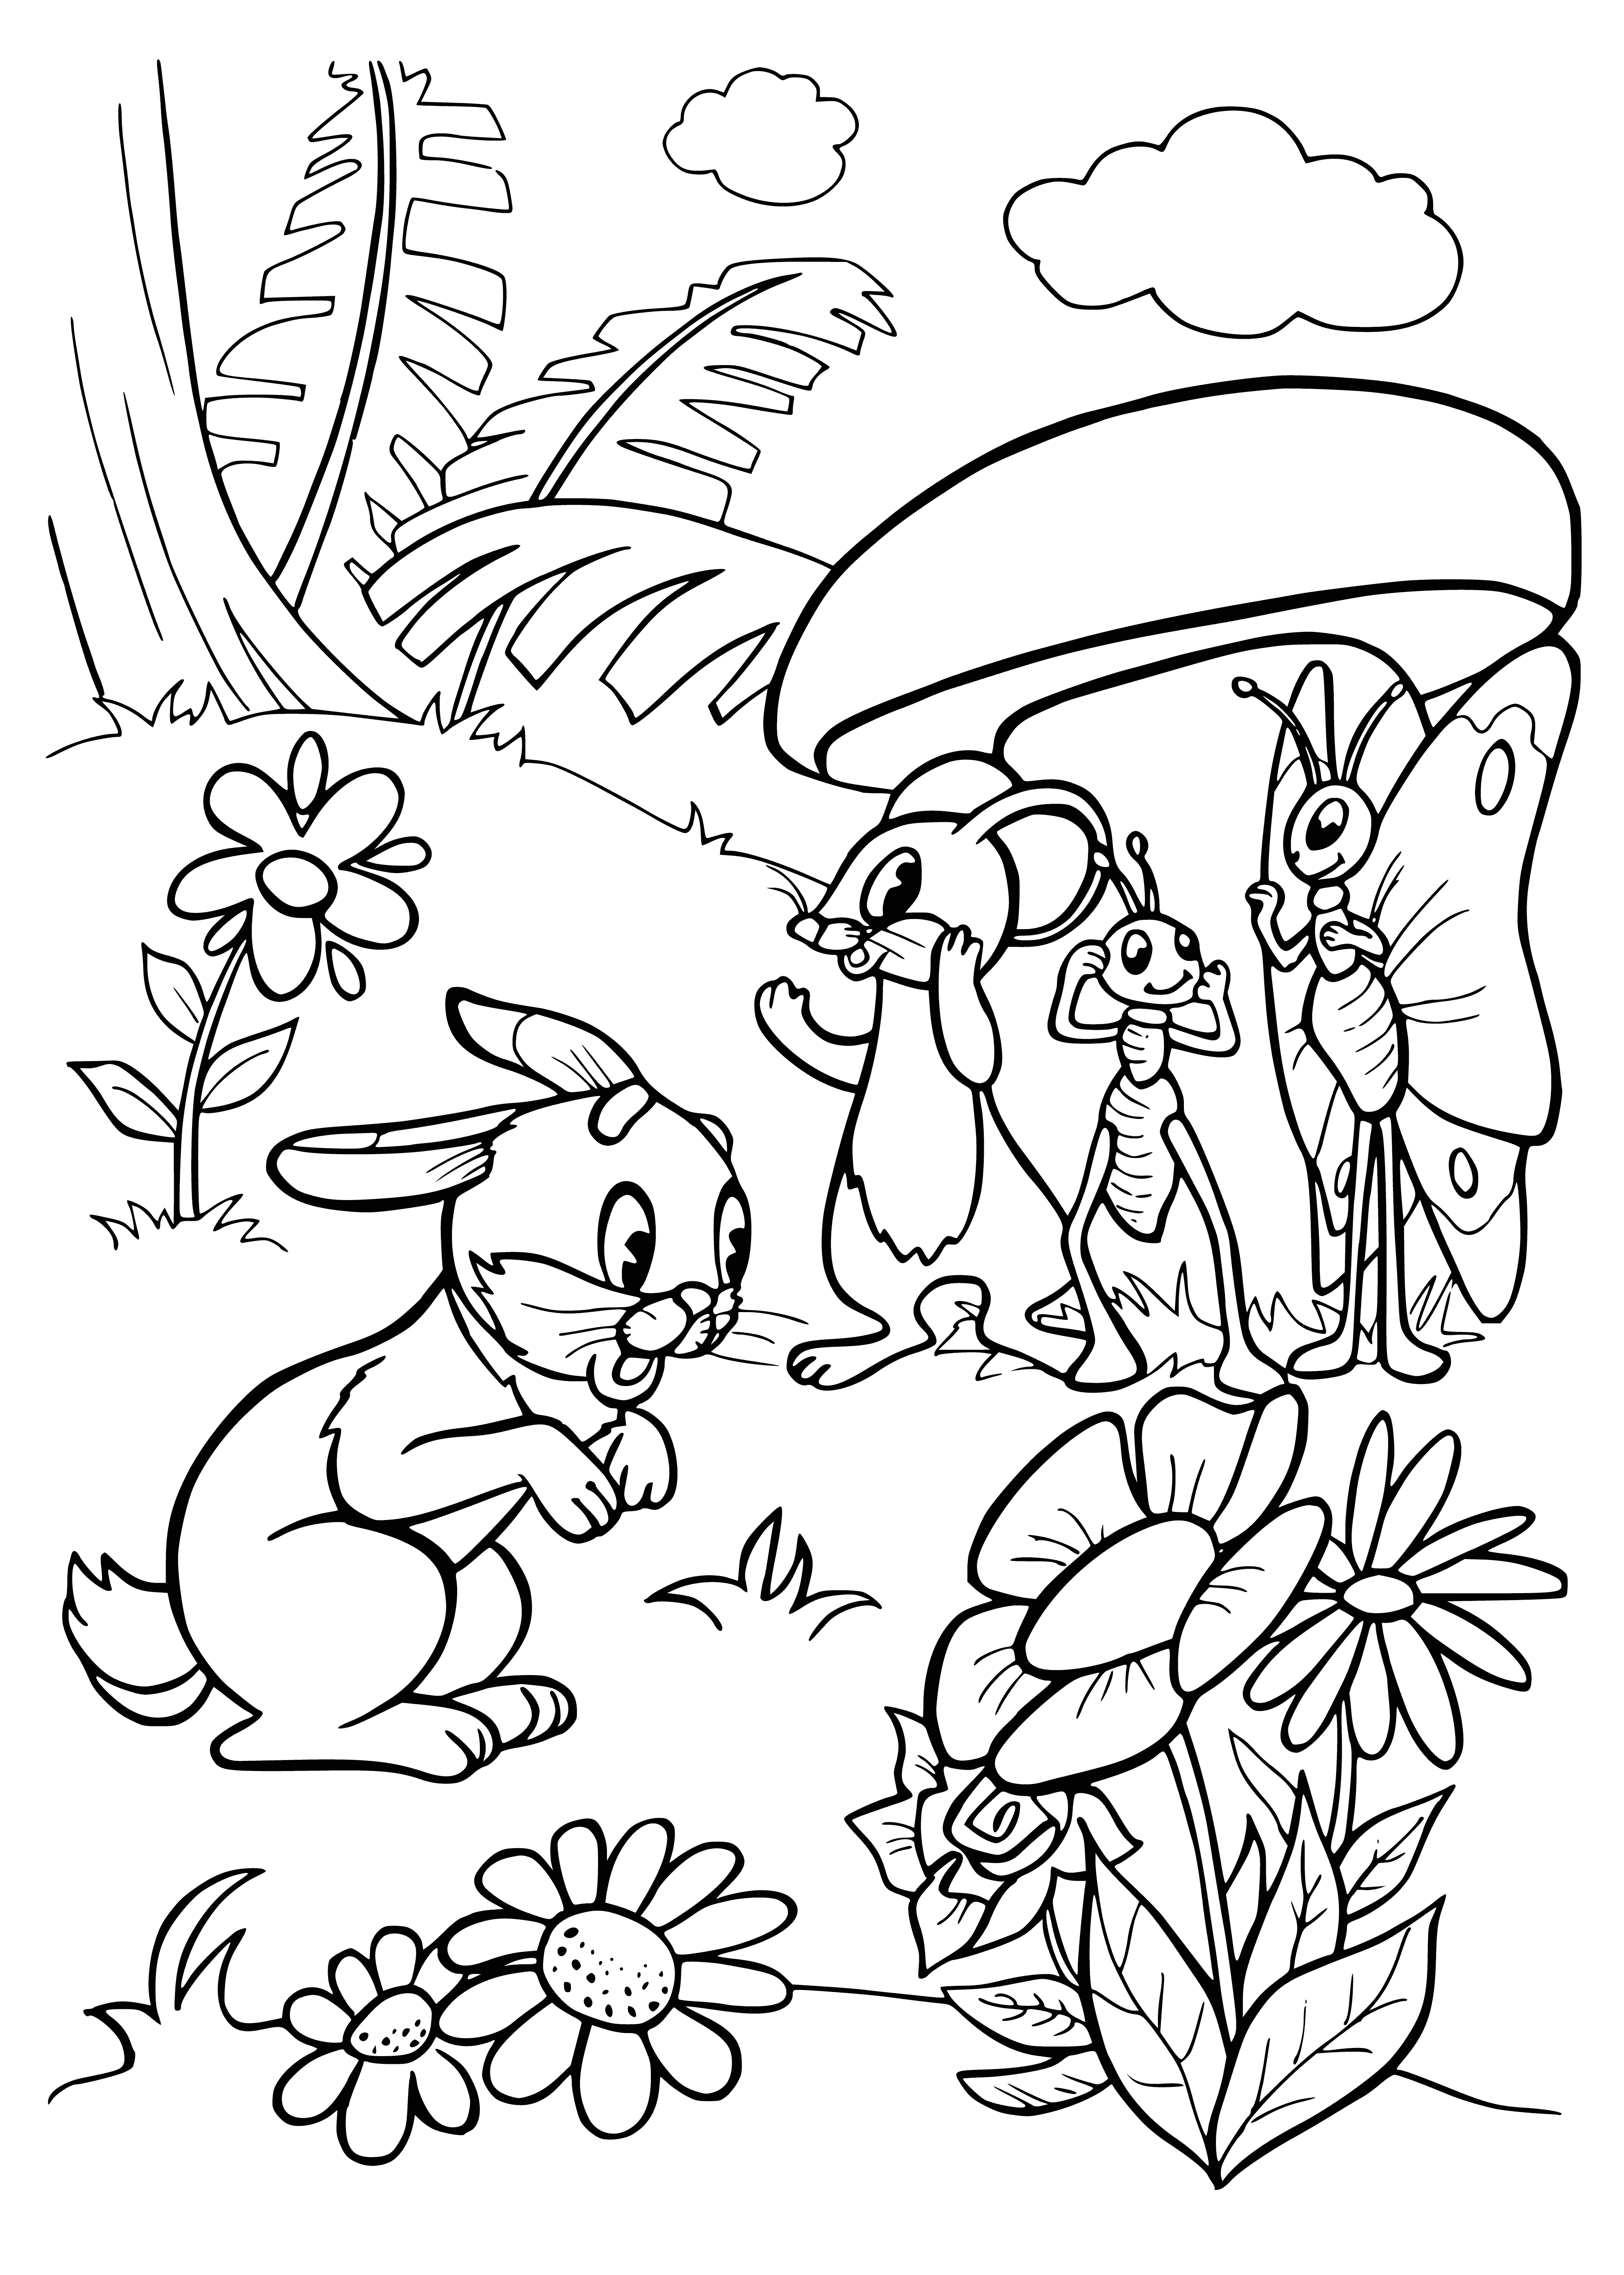 coloring page: Creature hiding behind a brown mushroom, surrounded by green leaves and grass. #coloringpage